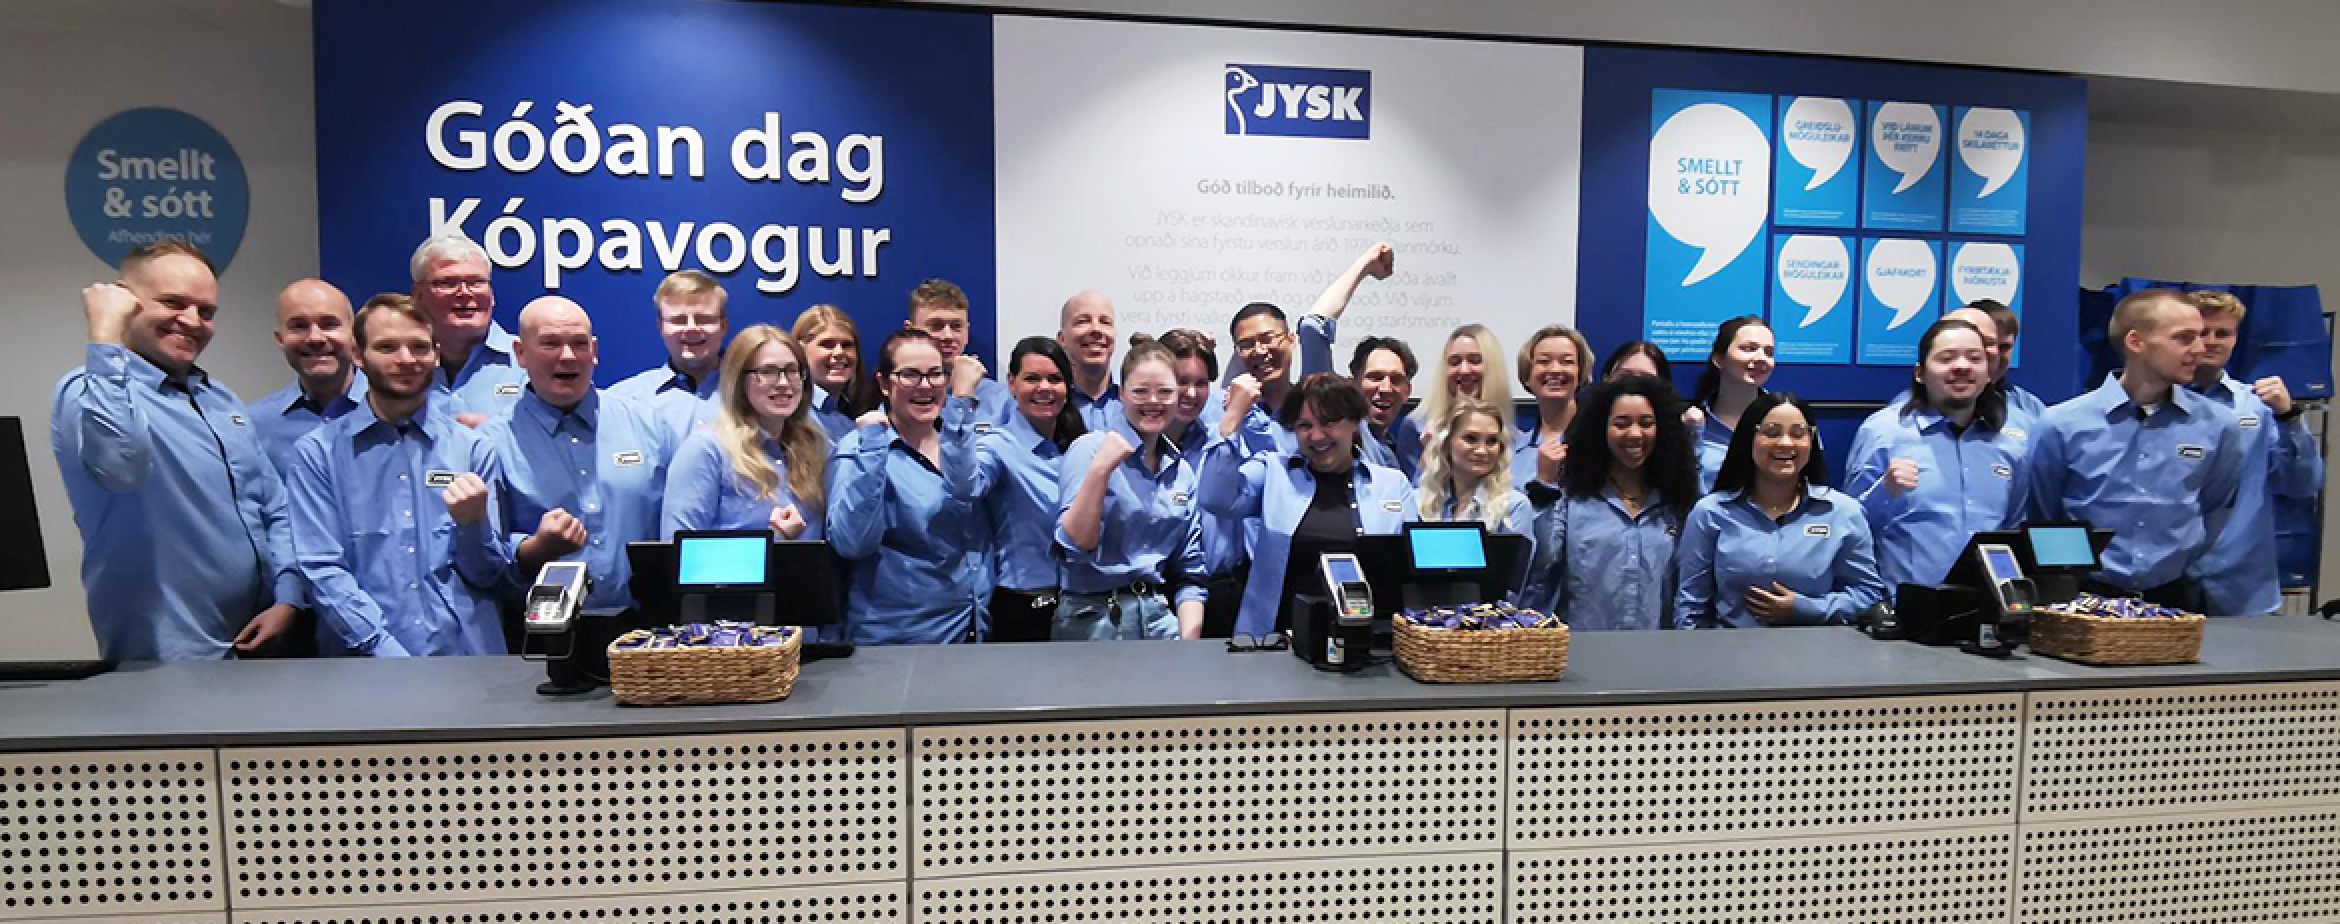 World’s largest JYSK 3.0 store opens in Iceland